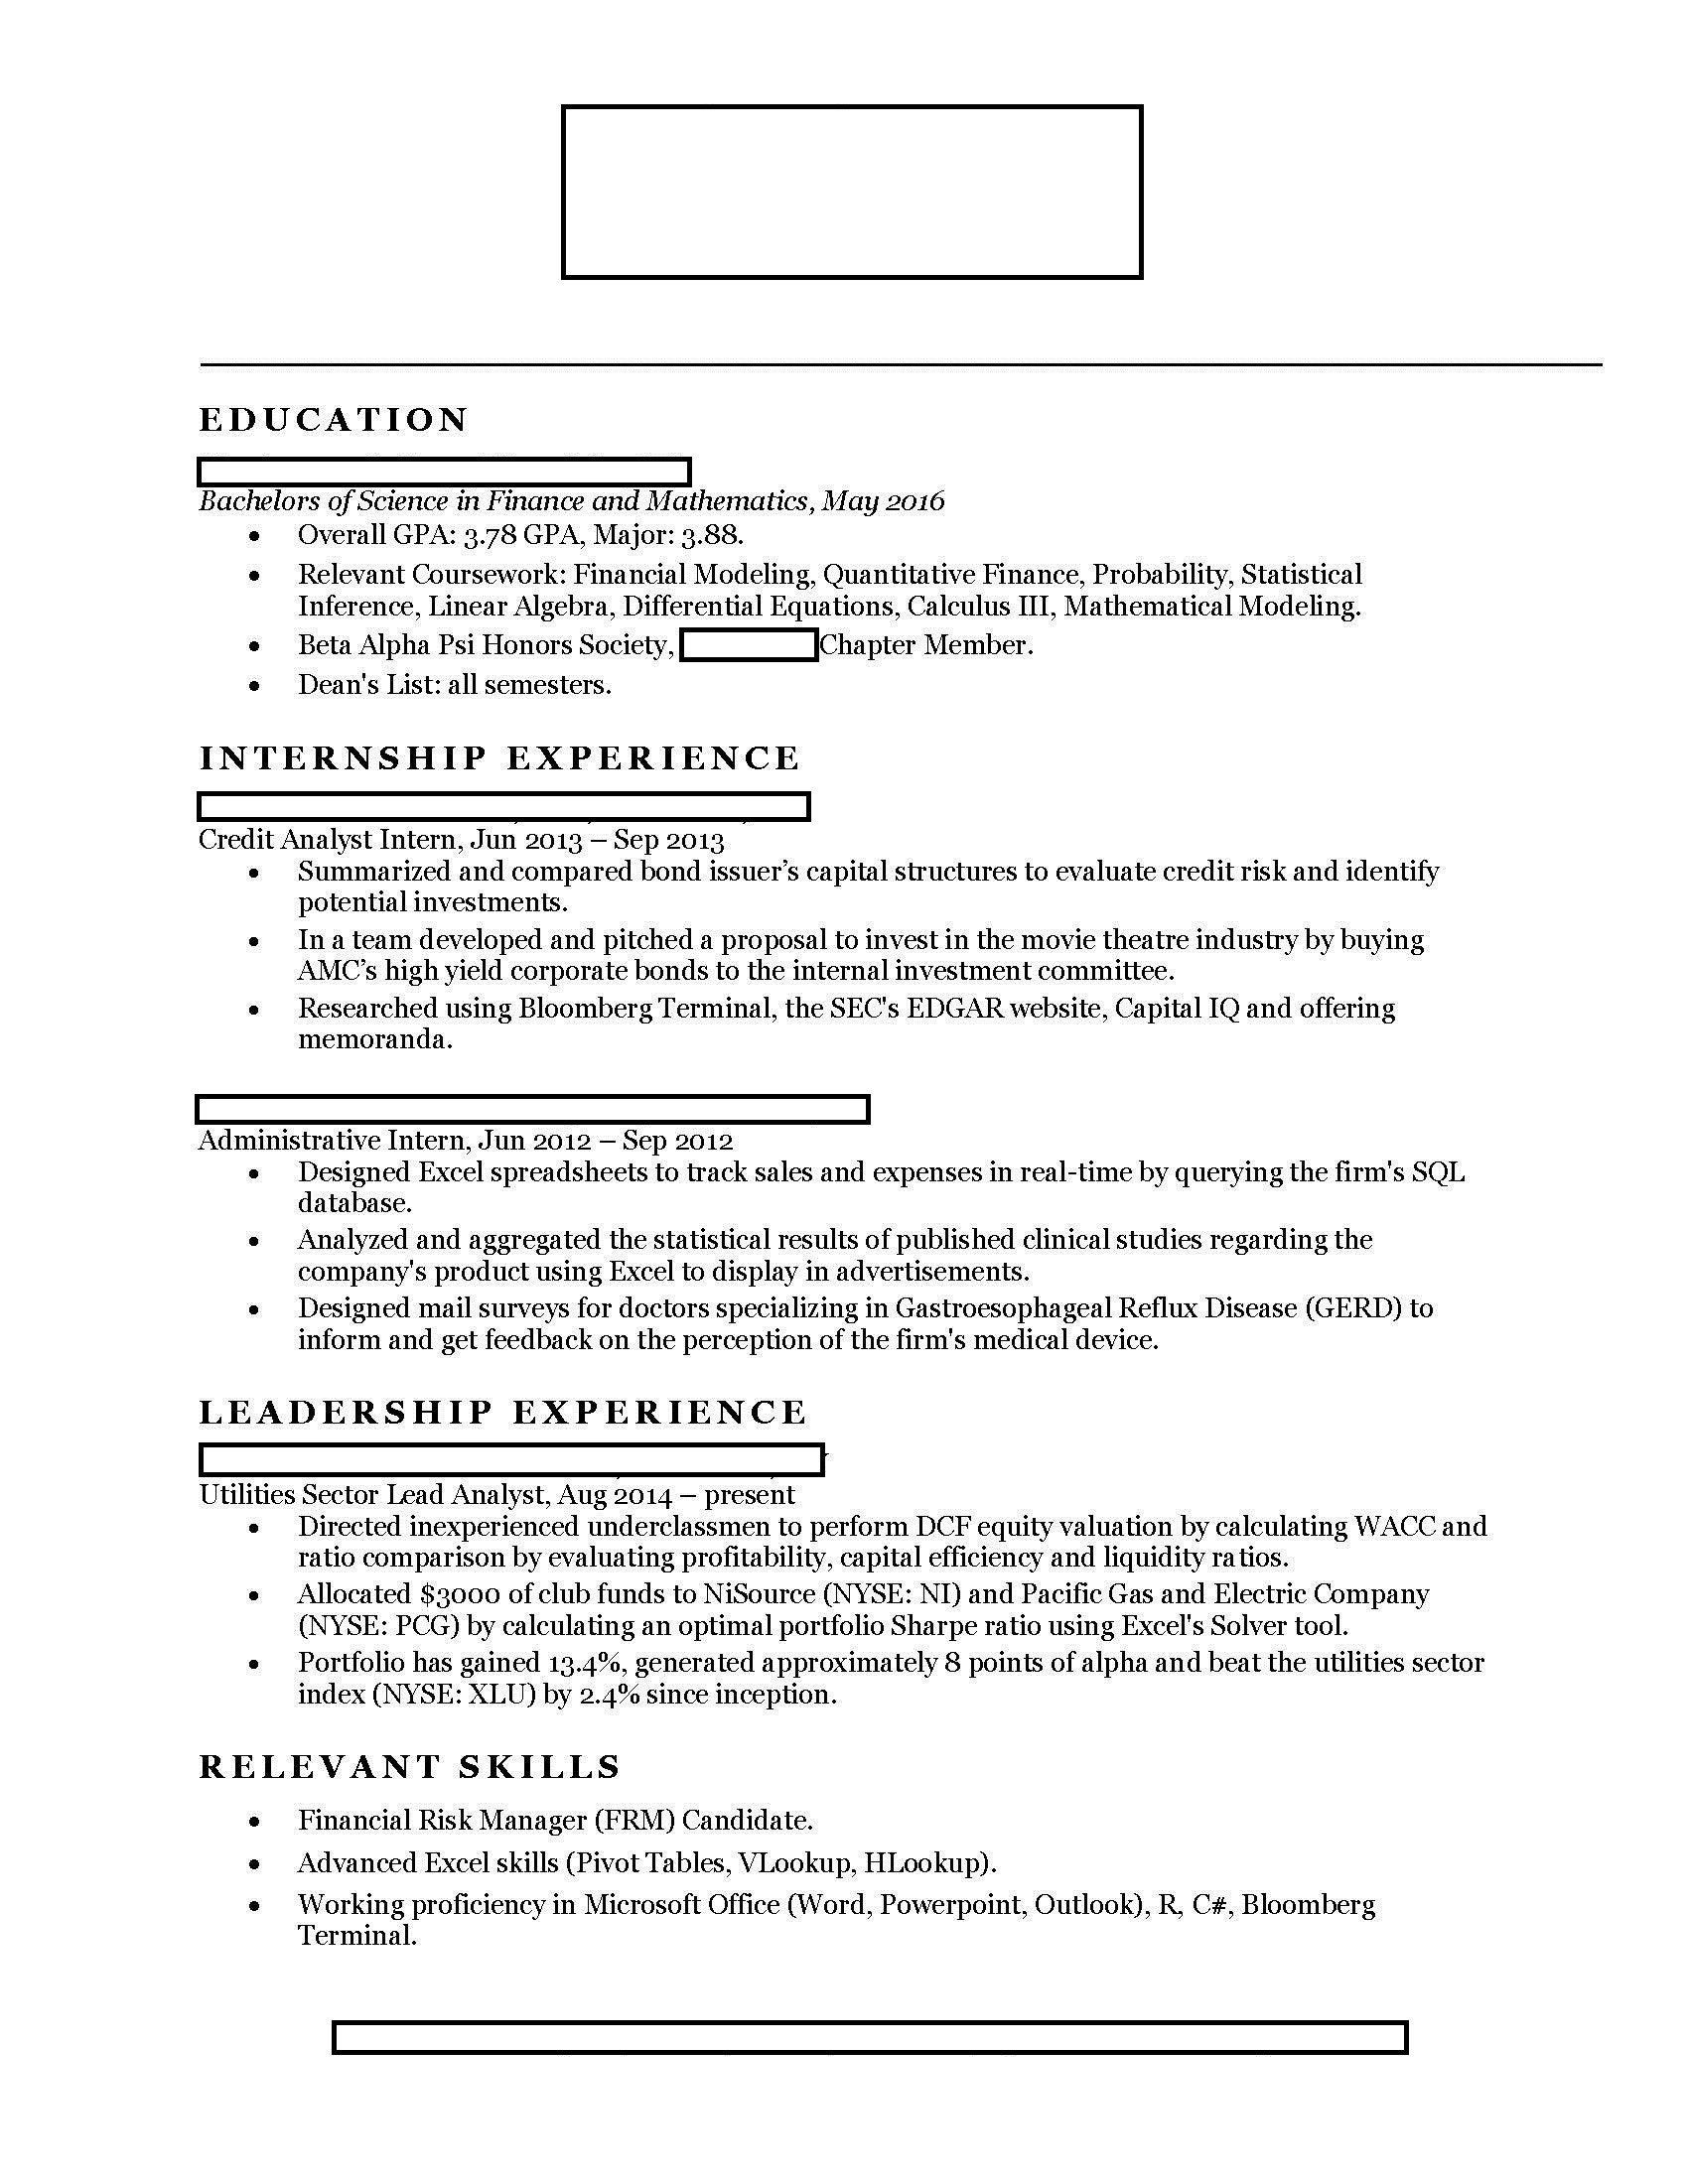 Sample Resume for Investment Banking Analyst Finance] Looking for Internships In Investment Banking/corporate …